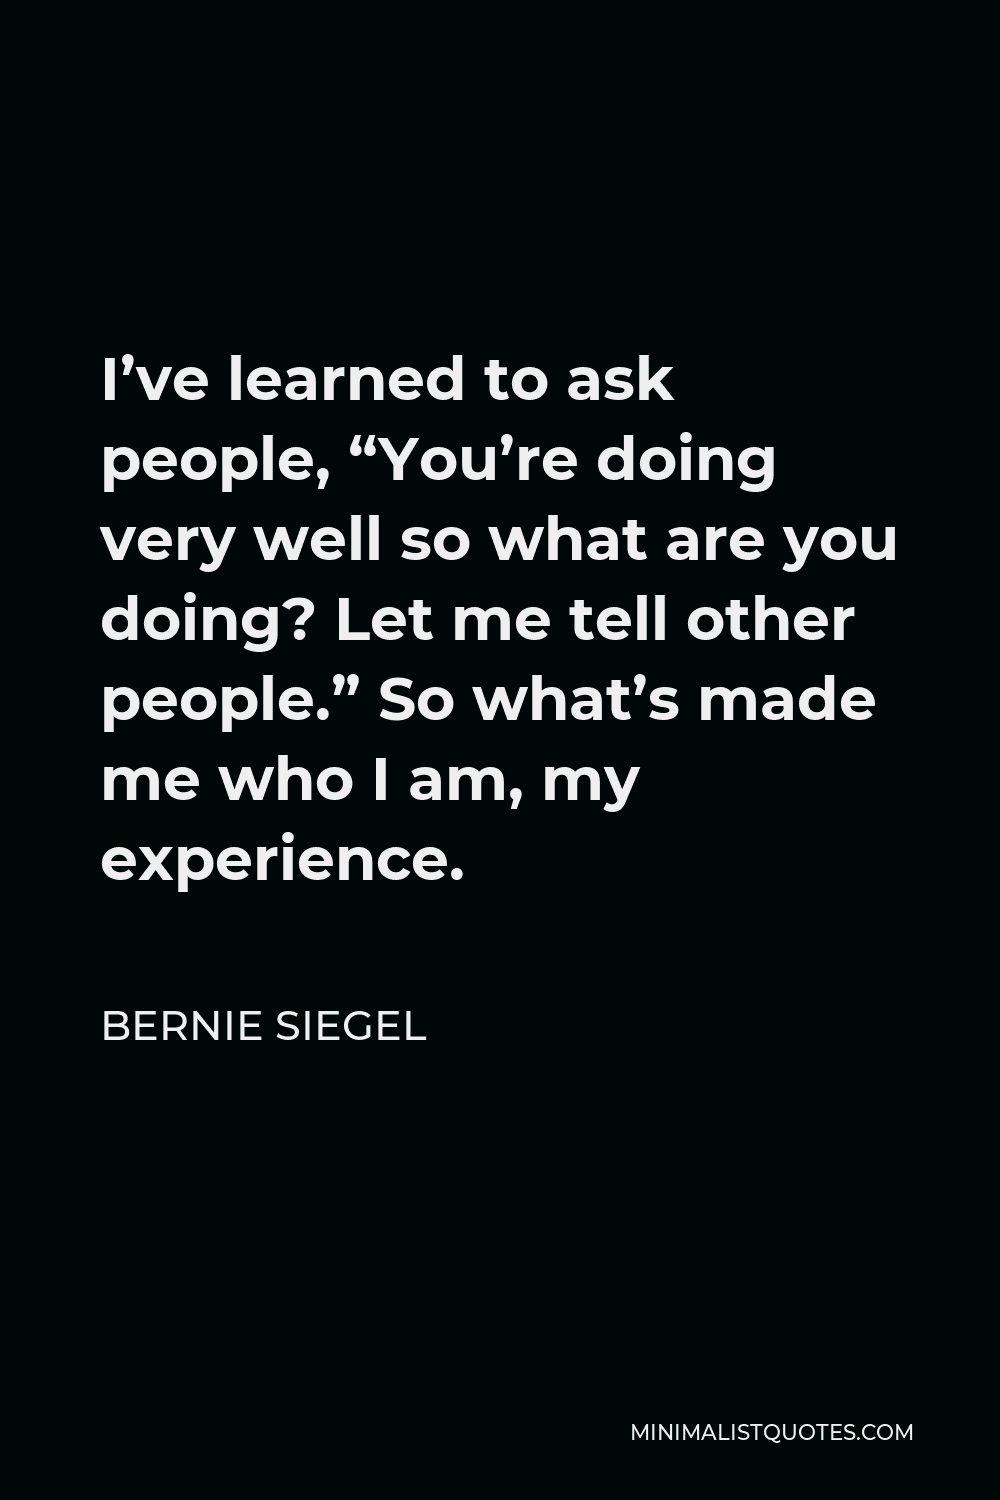 Bernie Siegel Quote - I’ve learned to ask people, “You’re doing very well so what are you doing? Let me tell other people.” So what’s made me who I am, my experience.